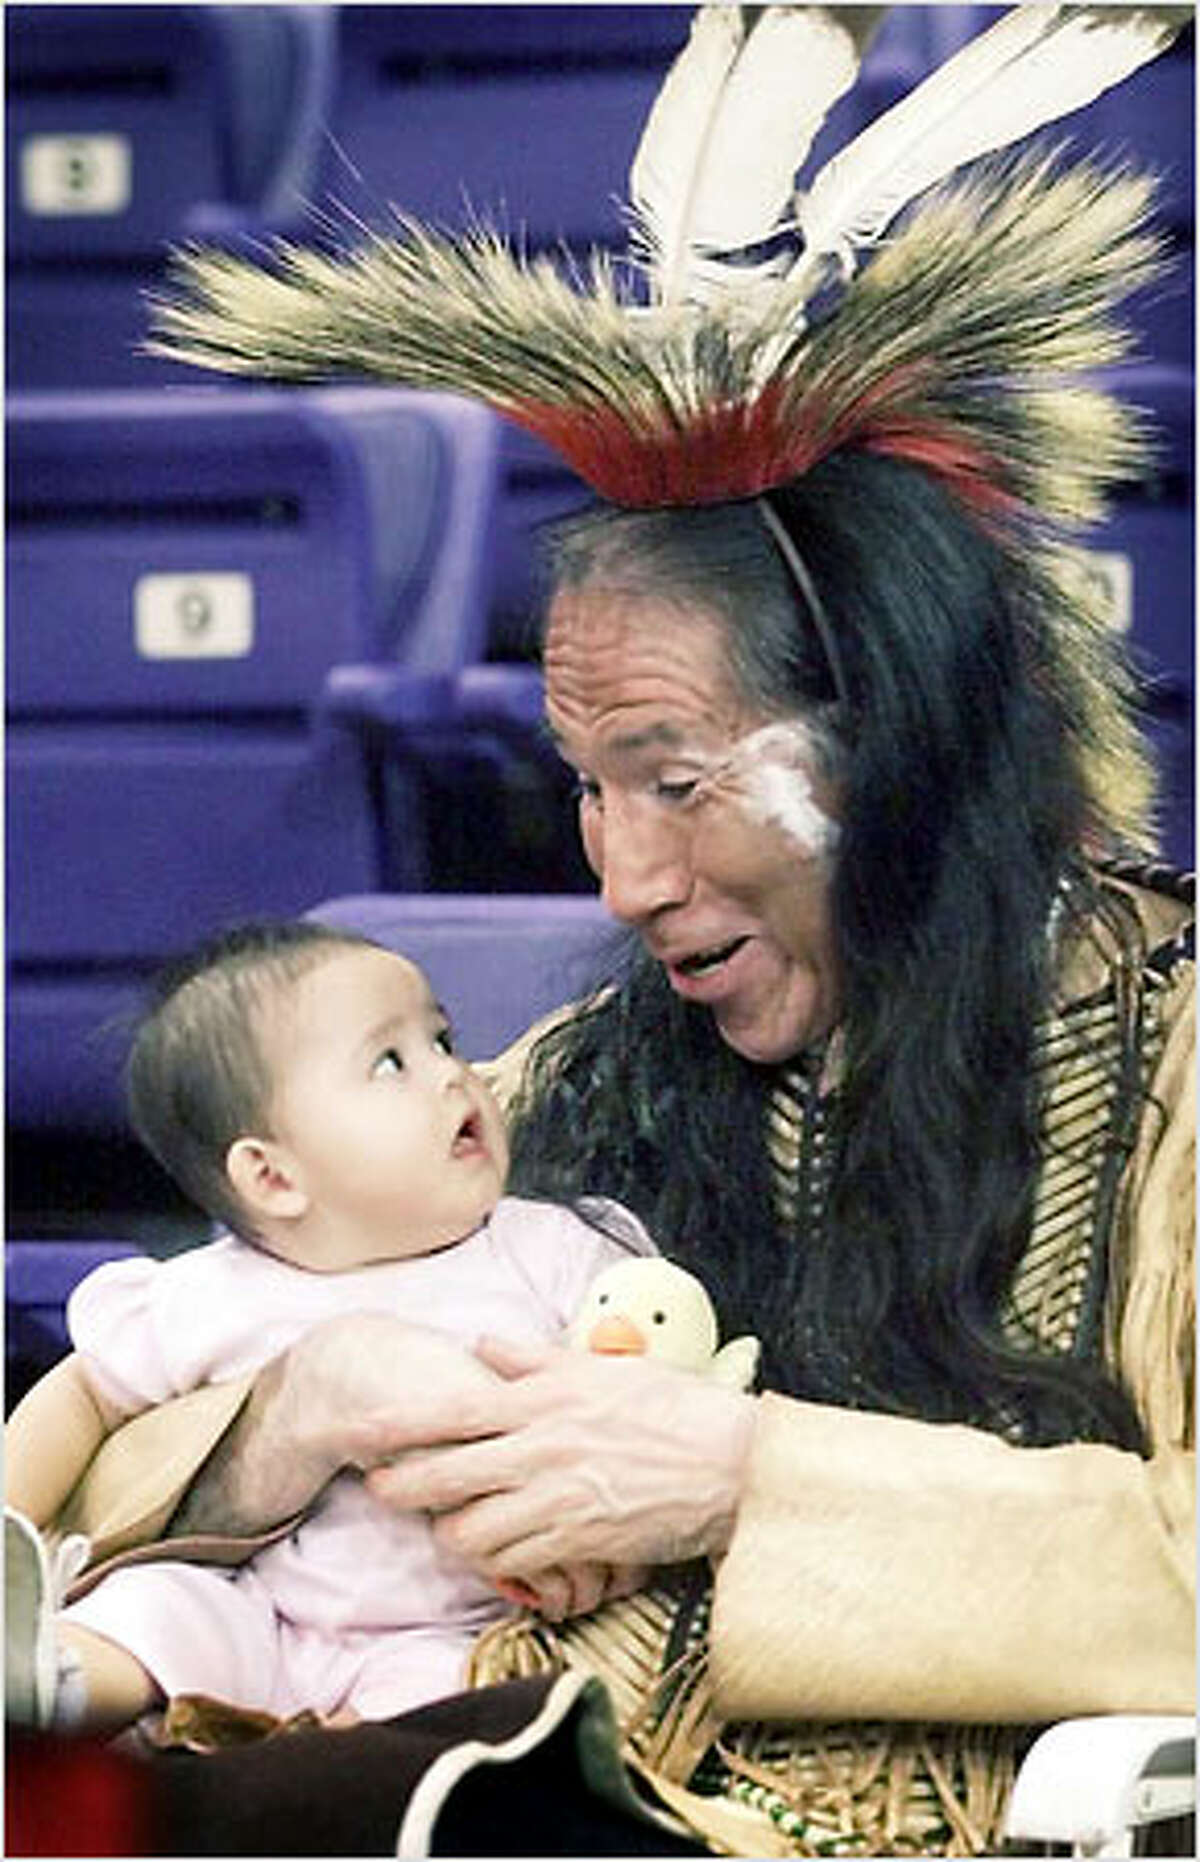 Bob Red Elk, of Beacon Hill, bounces his granddaughter Shana George, 6 months old, on his knee to the beat of dancing drums during the "Pow Wow at the UW" held yesterday at the Bank of America Arena on the UW campus. Red Elk, a Lakota Dakota, was among more than 200 dancers from across the nation competing in the gathering.